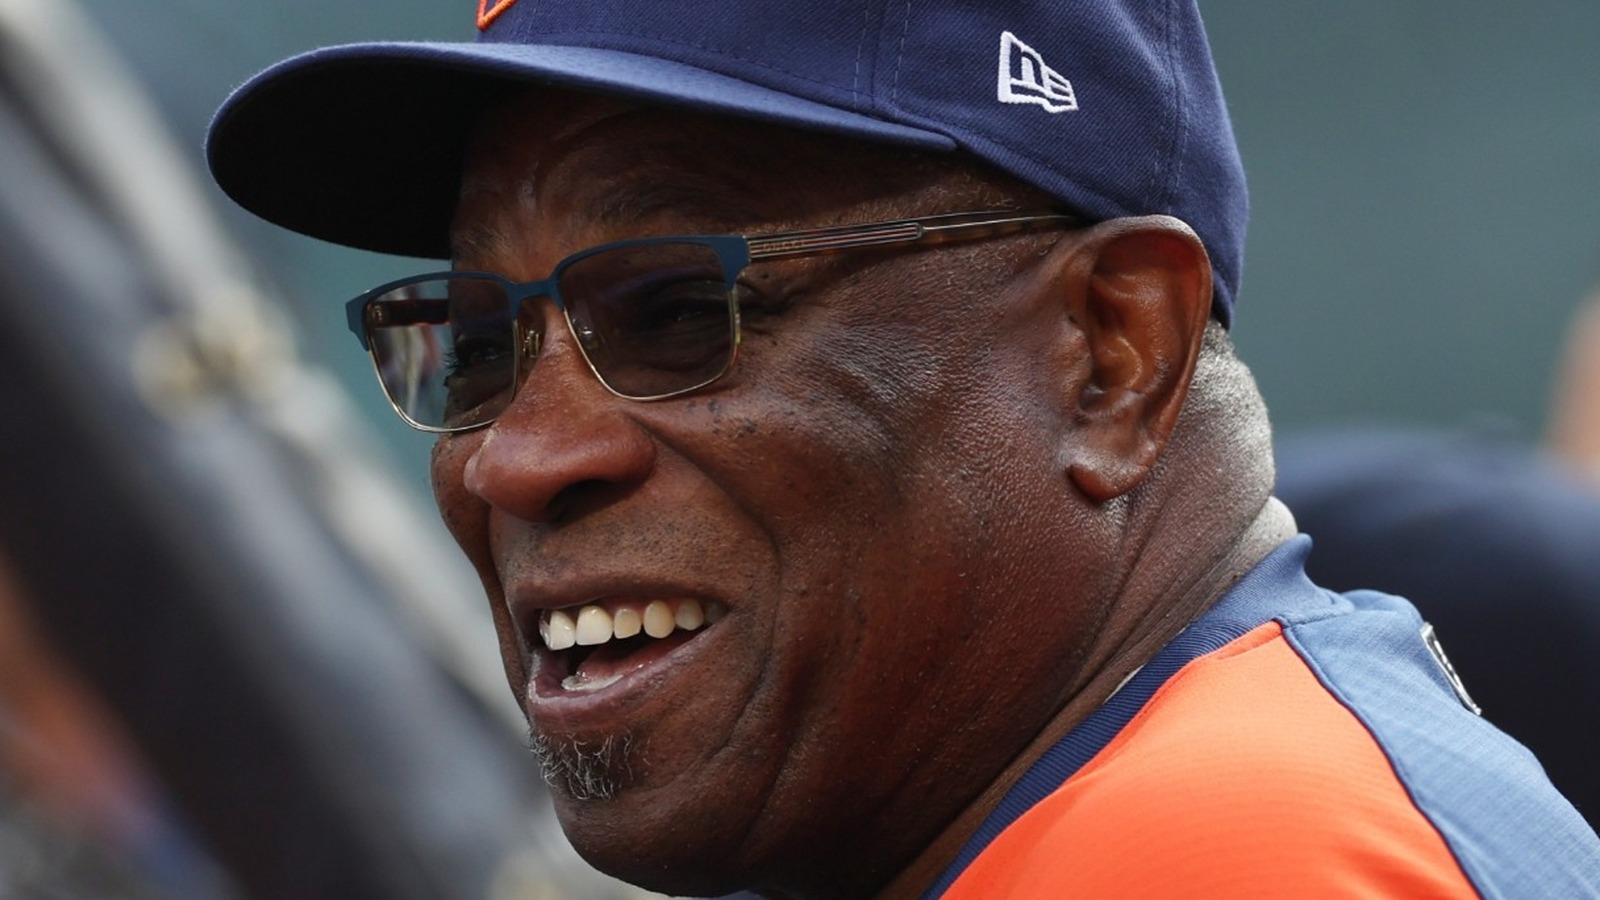 Dusty Baker Hired as Astros' Manager in Wake of Scandal - The New York Times